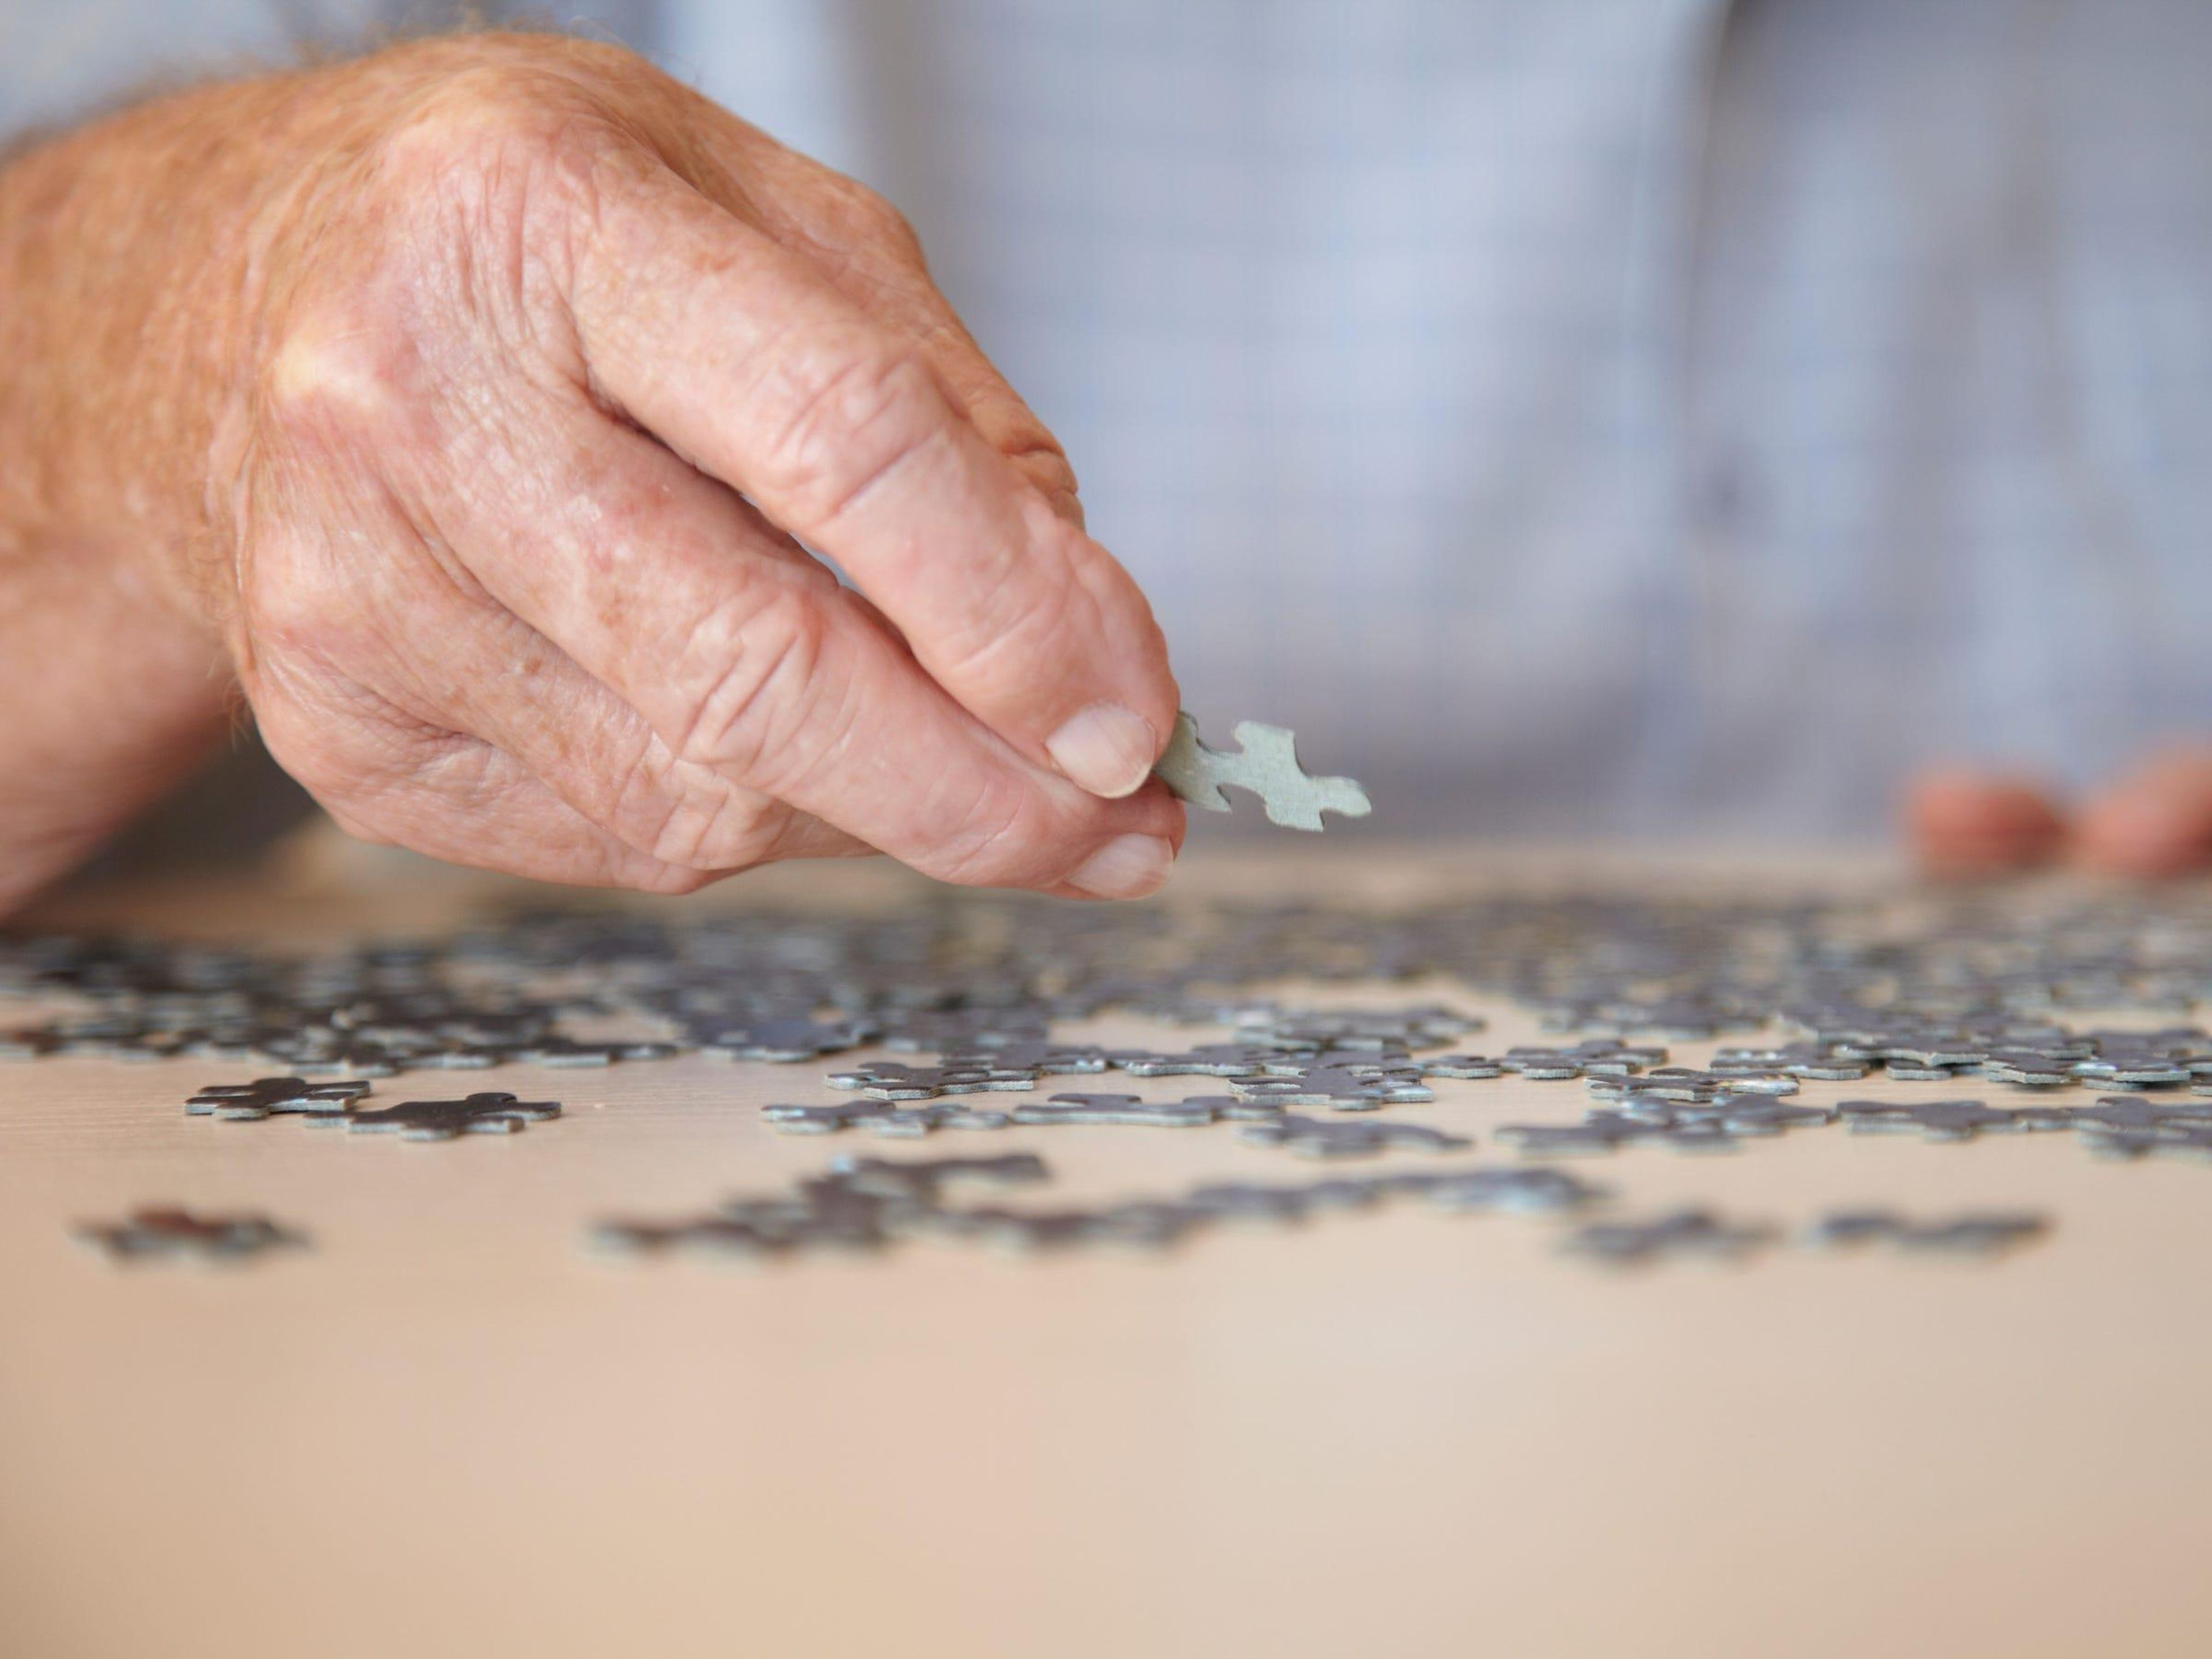 Negative thinking linked to dementia later in life, study finds